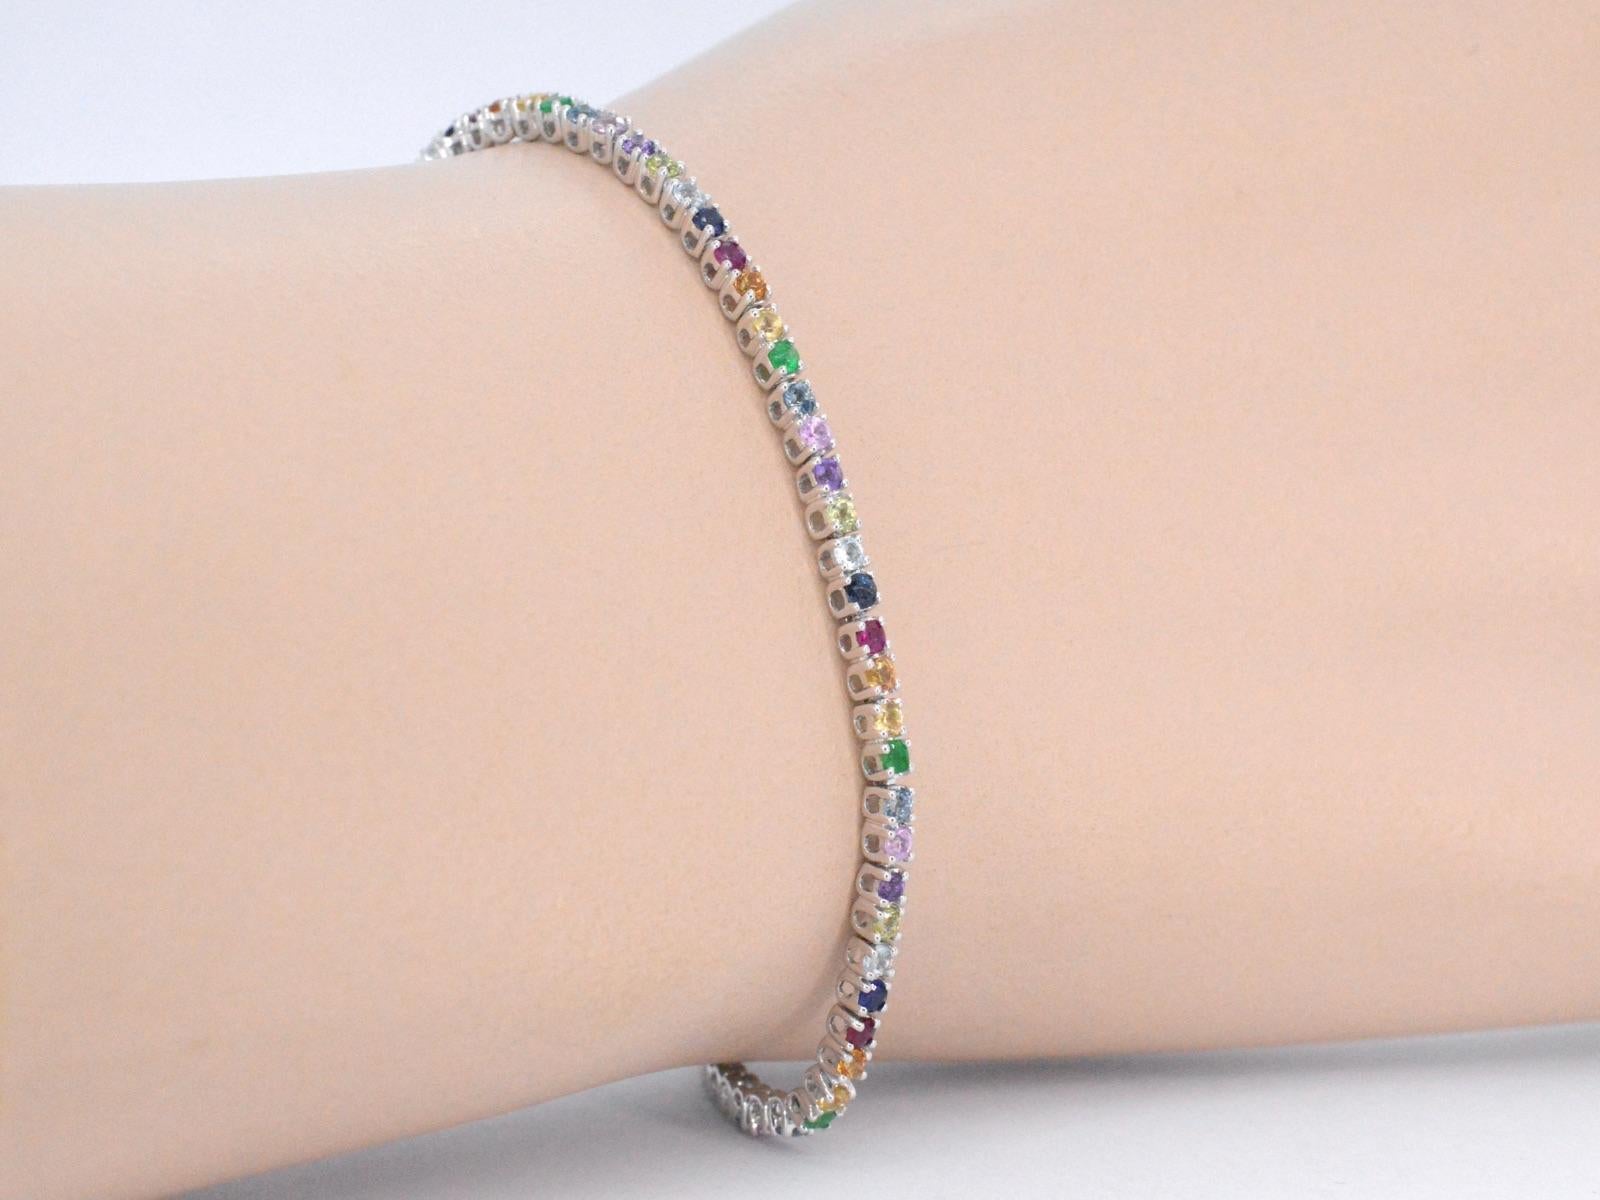 Gemstones: rainbow
Weight: 2.50 carats
Colour: multicolour
Clarity: With natural inclusions
Cut: Brilliant cut
Quality: Very good

Jewel: Bracelet
Weight: 5.5 gram
Hallmark: 14 karat 
Length: 18 cm
Condition: New

Retail value: € 3.250,-

The white